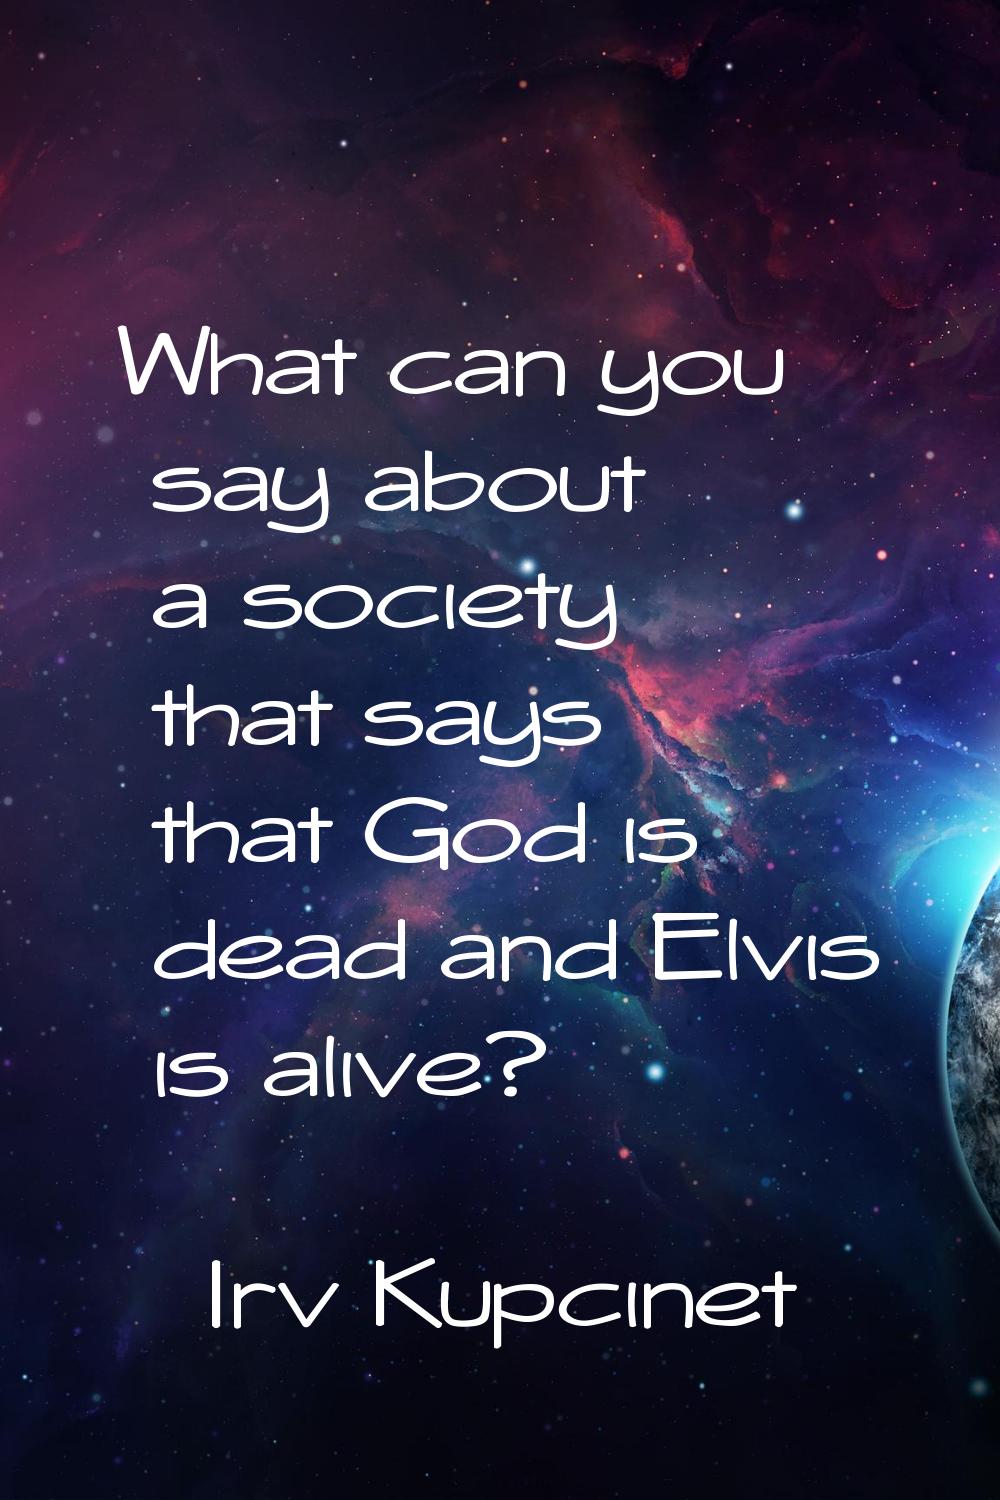 What can you say about a society that says that God is dead and Elvis is alive?